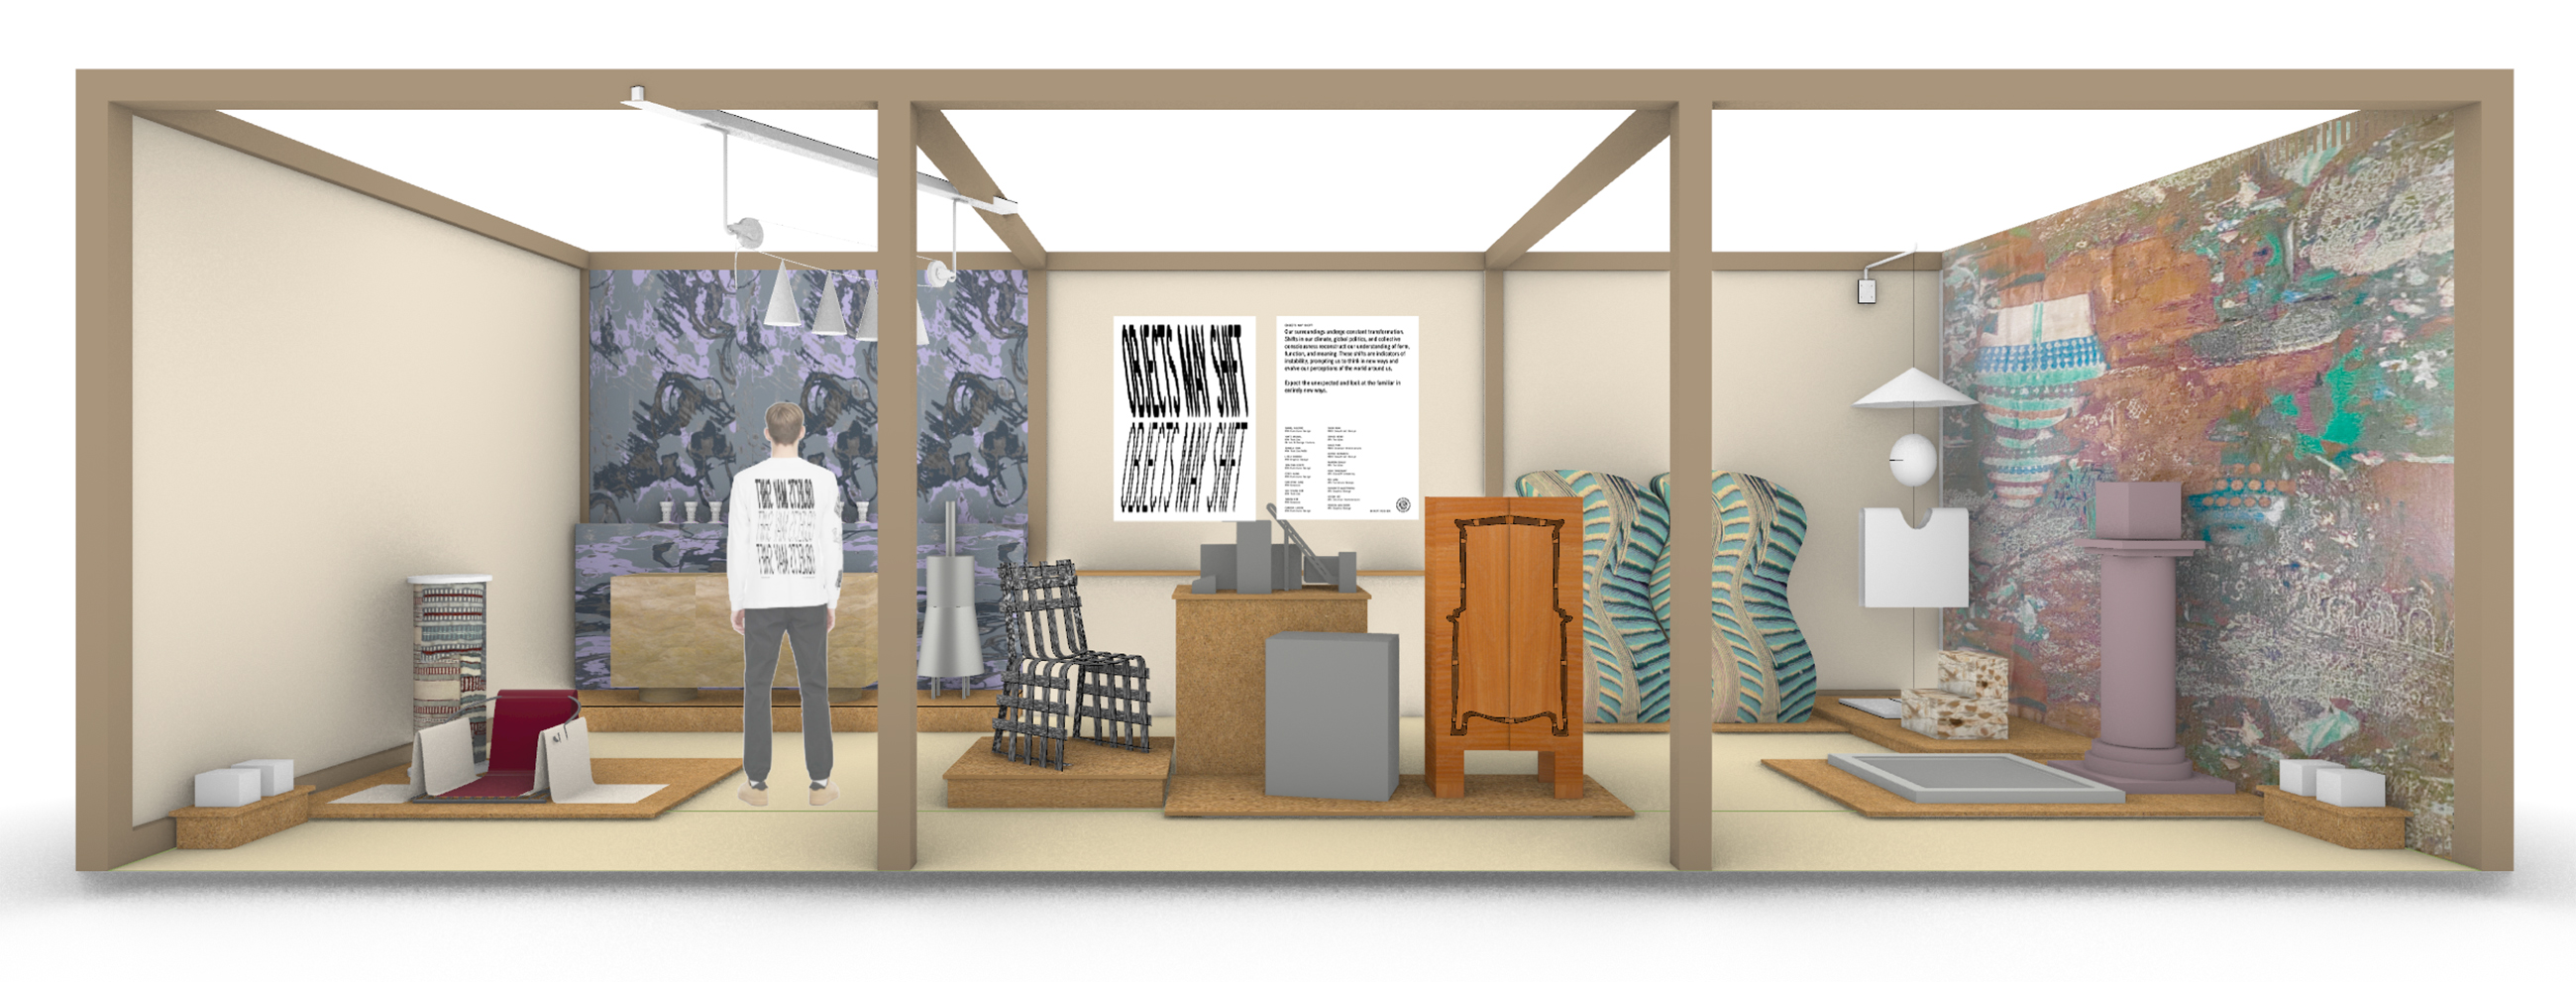 a rendering of the booth design